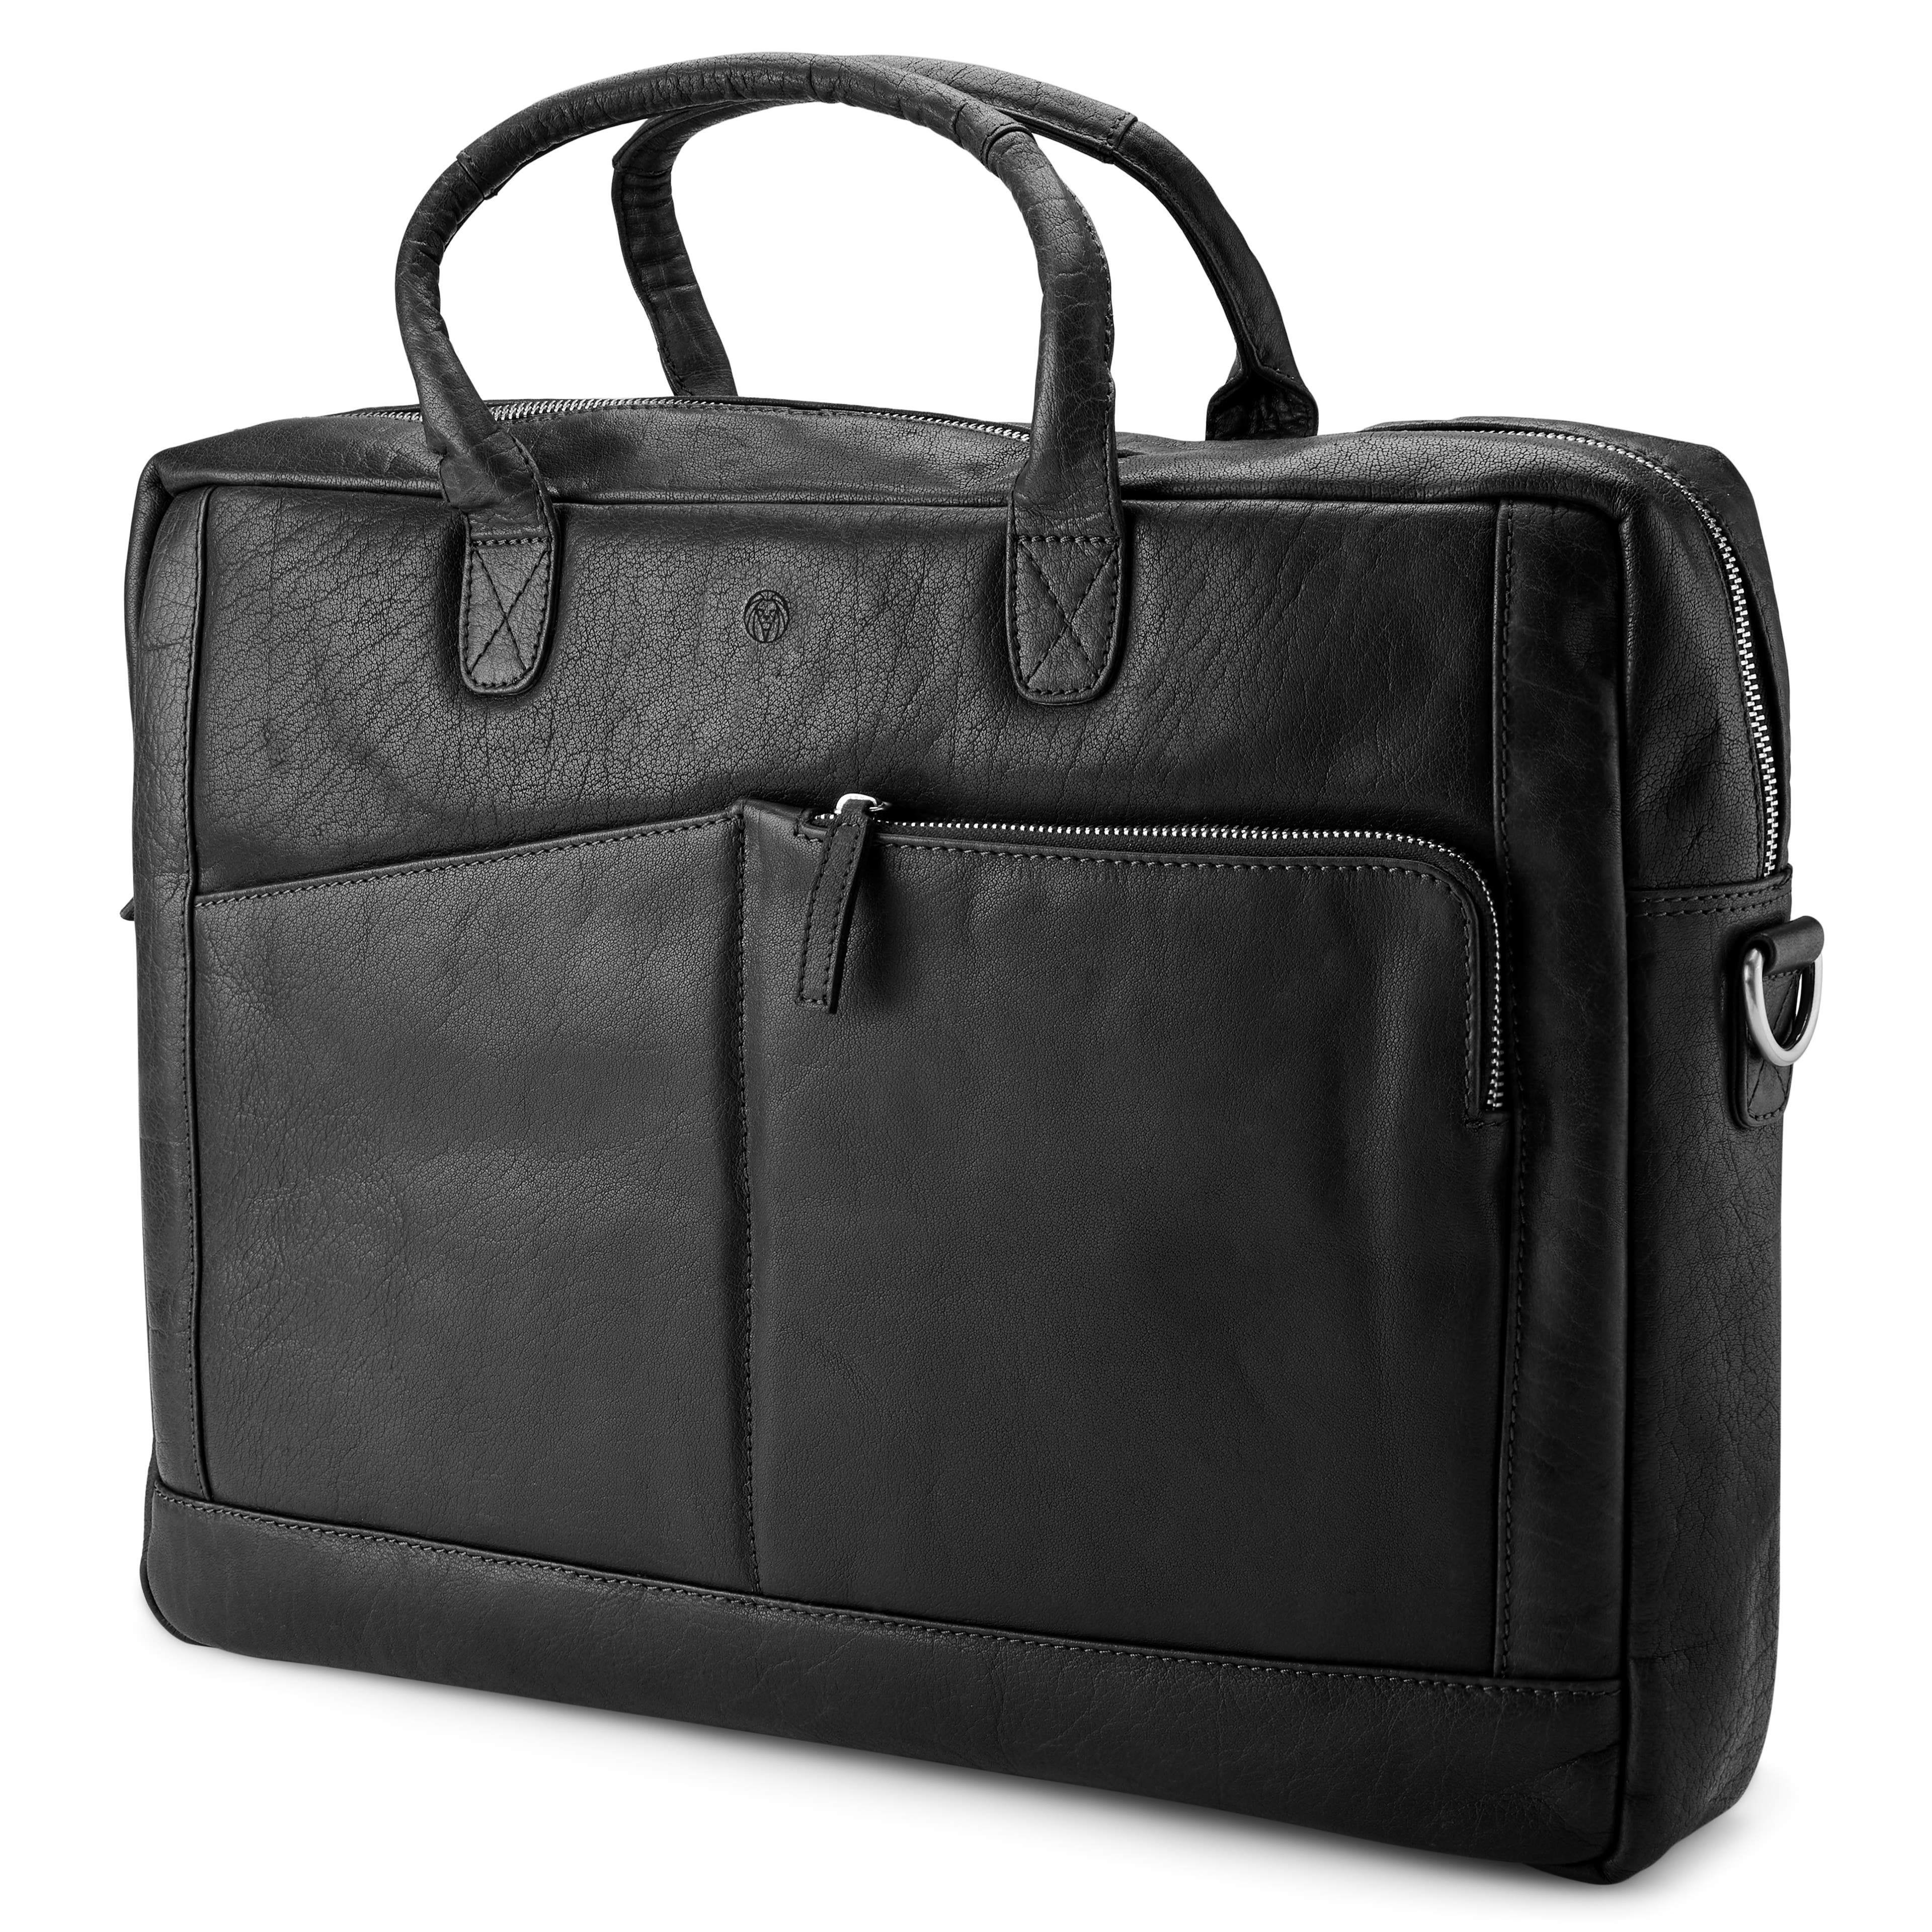 Montreal Classic Black Leather Laptop Bag 